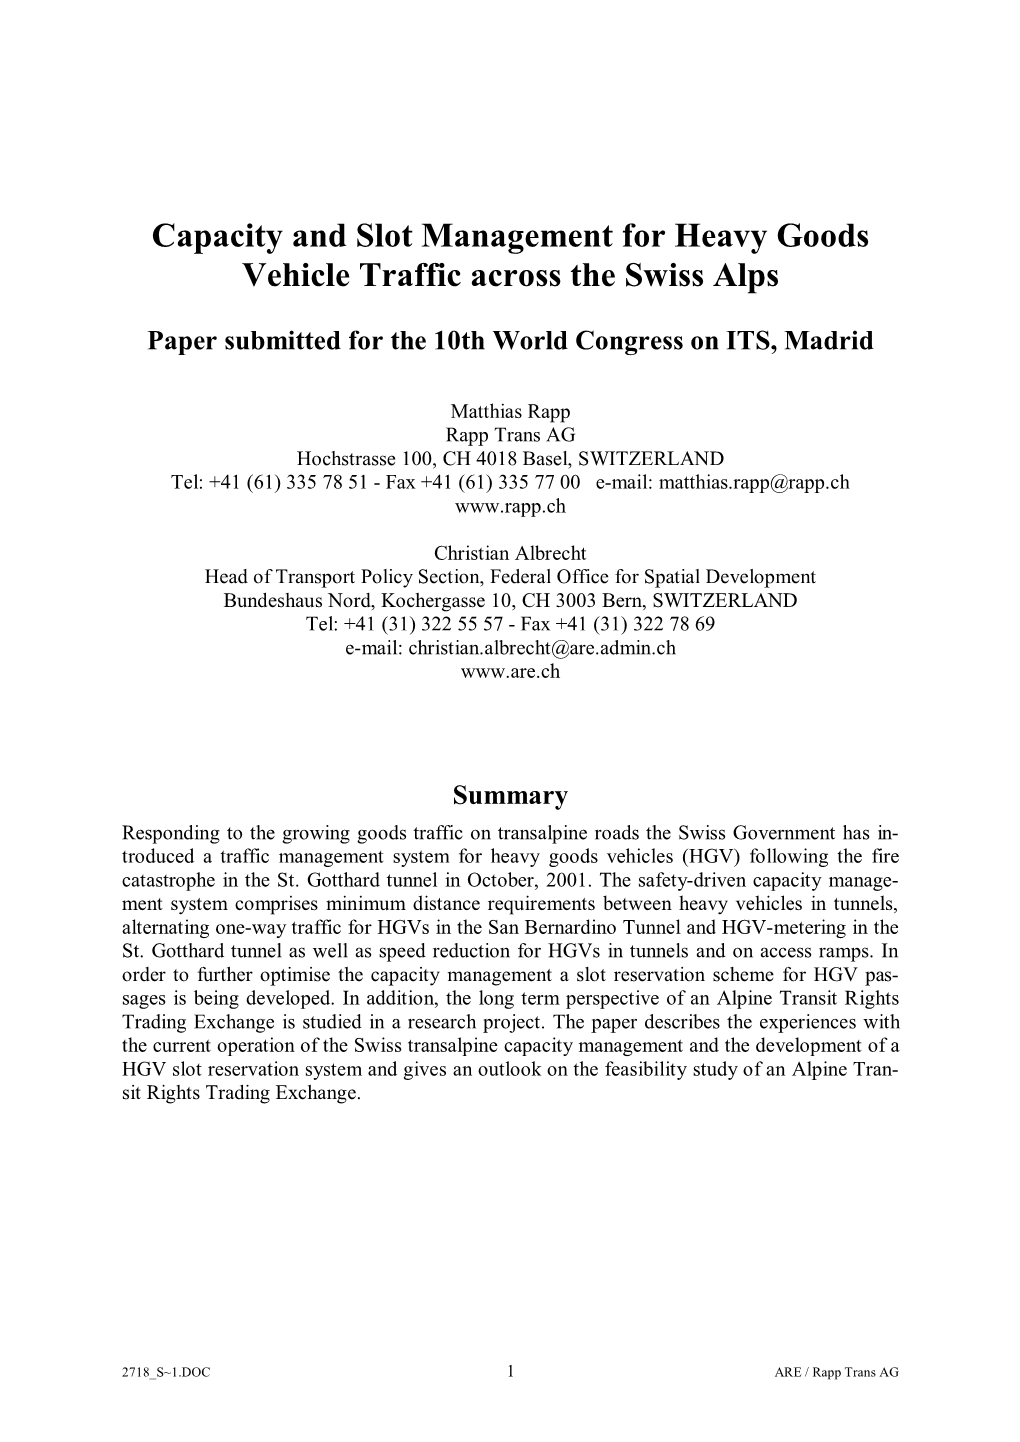 Capacity and Slot Management for Heavy Goods Vehicle Traffic Across the Swiss Alps